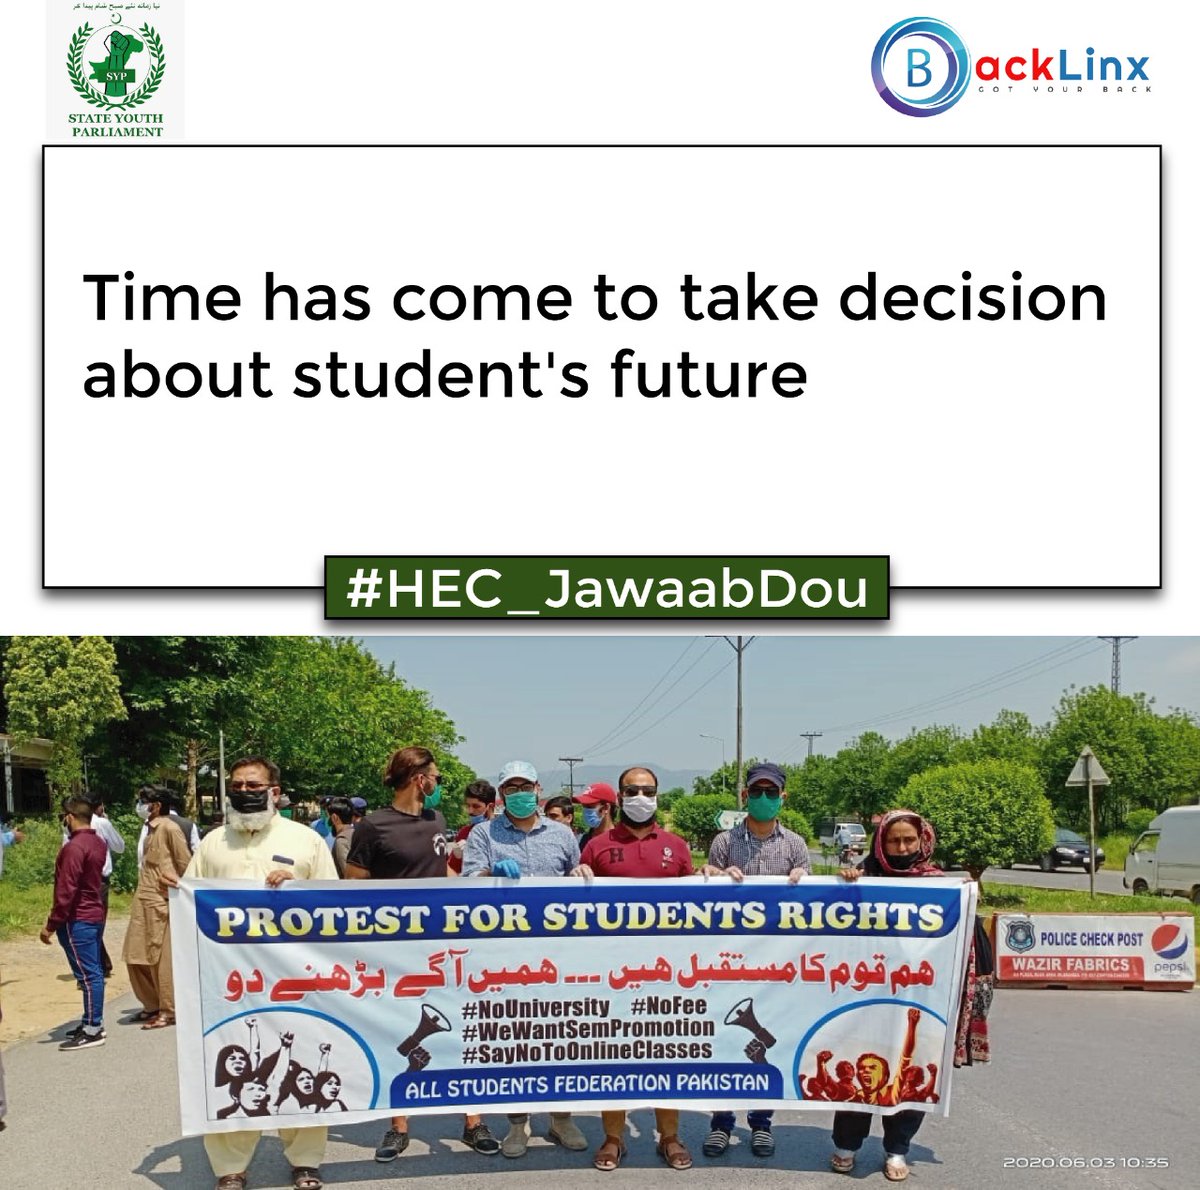 Many students don't hv any access to online classes so don't play wd students future.
#stoponlineclasses
#HEC_JawaabDou